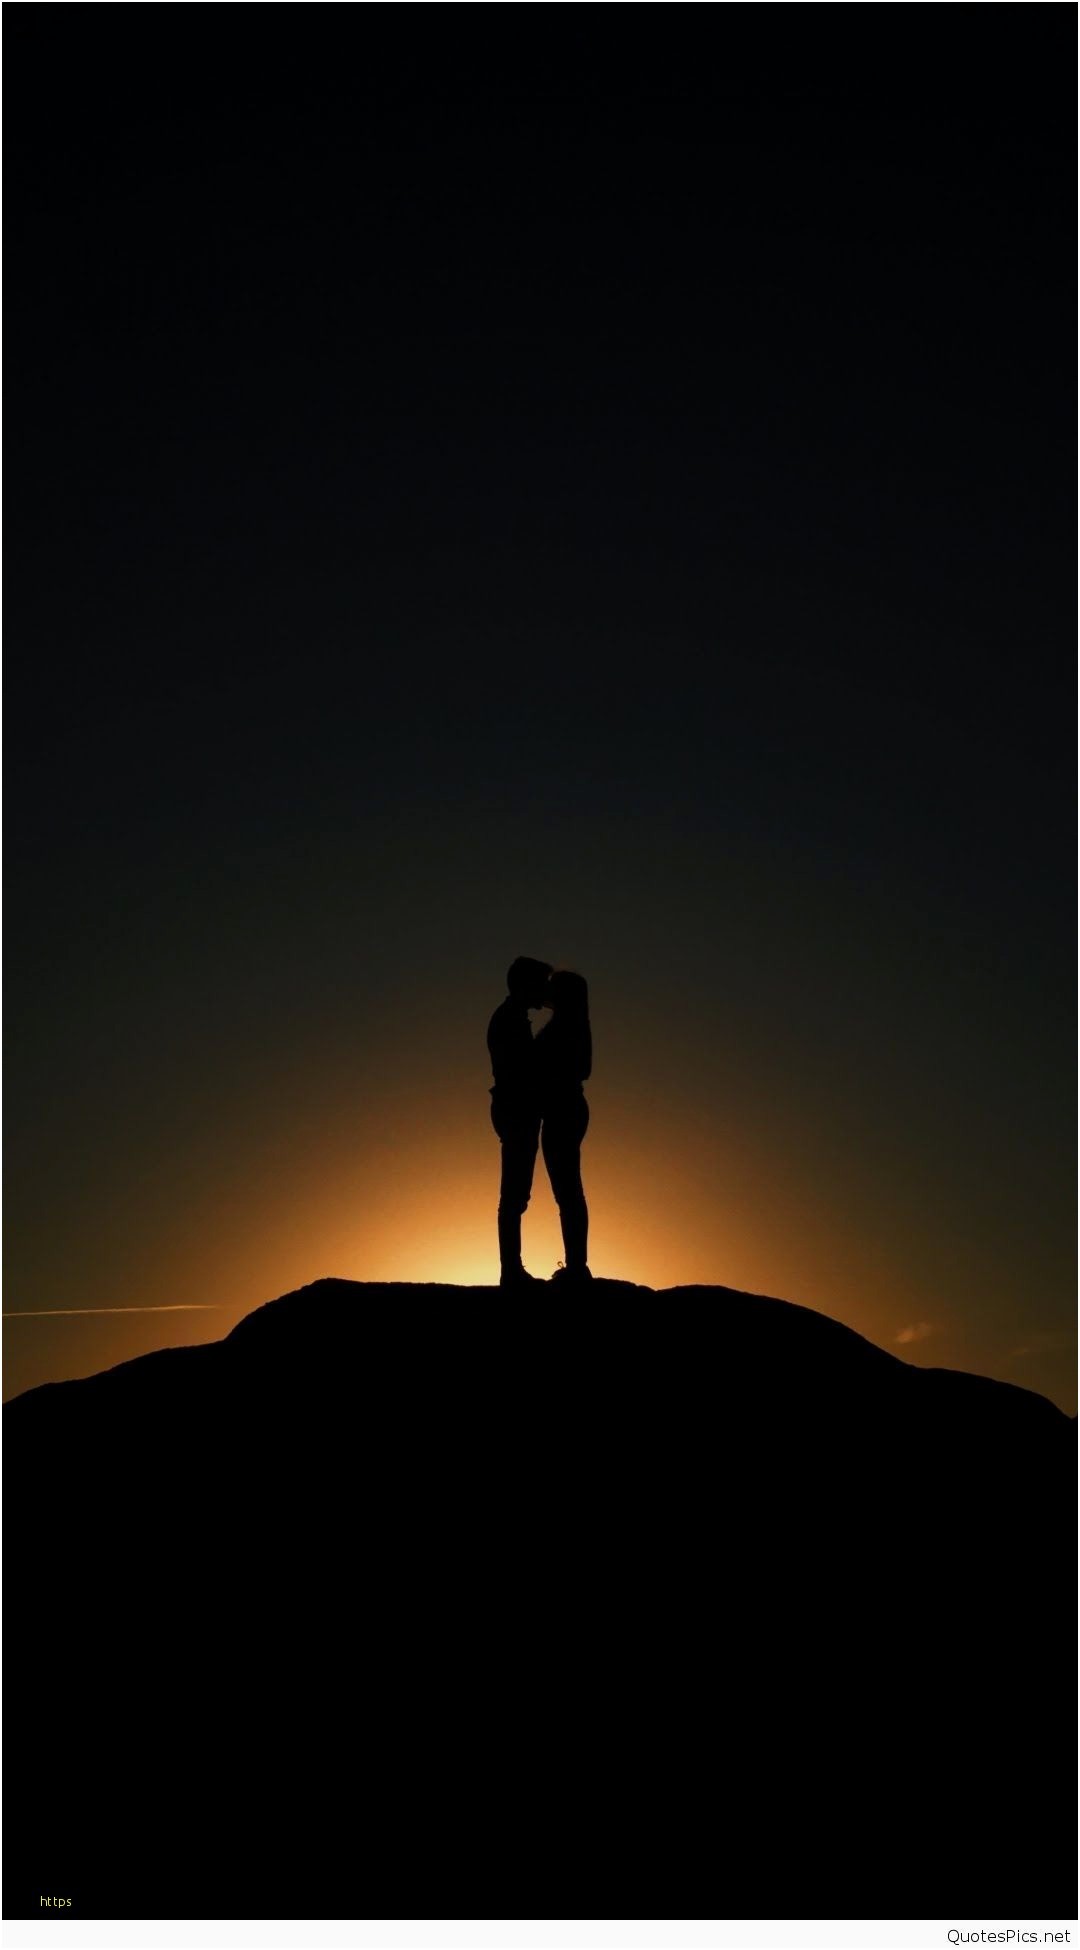 Wallpaper For Mobile Lovely Download Cute Love Wallpapers - Silhouette - HD Wallpaper 